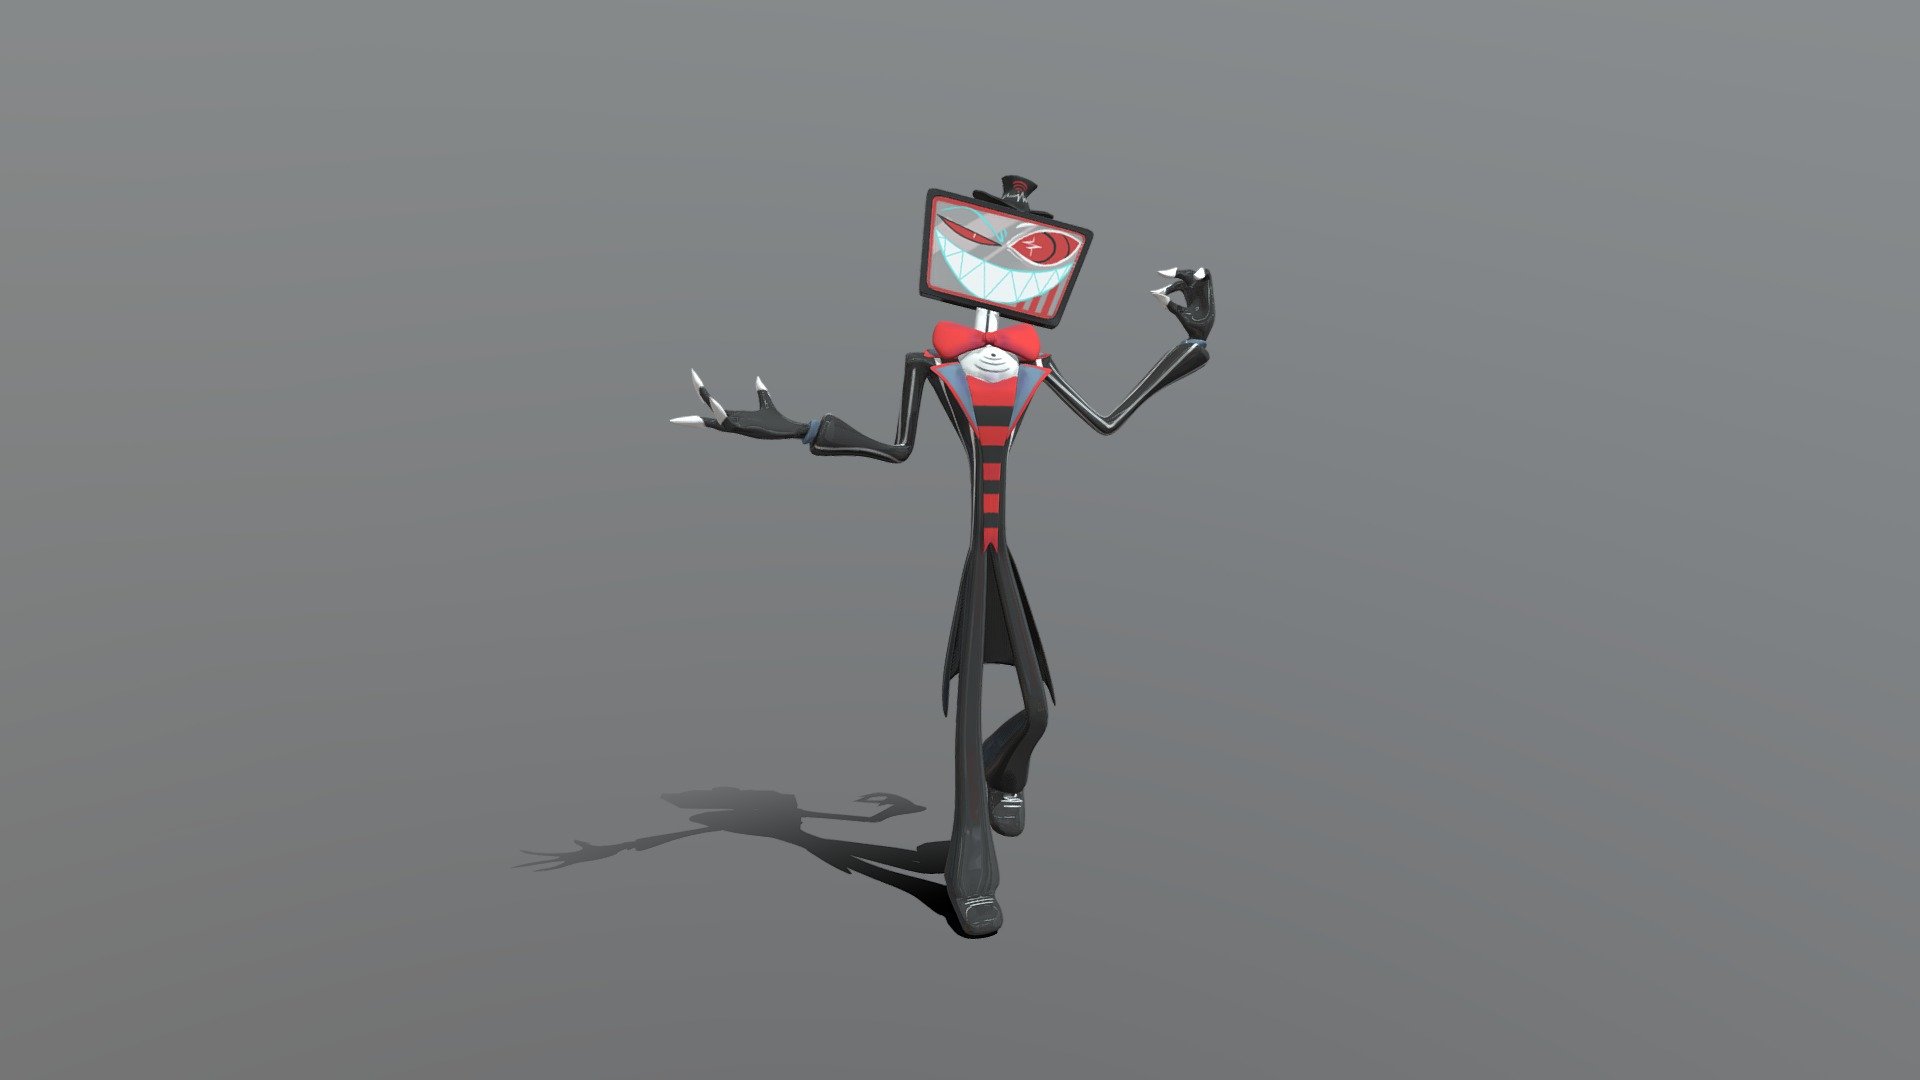 Model made with 3dMax and Zbrush, including UVs and handpainting. Character is Vox from Hazbin Hotel 3d model